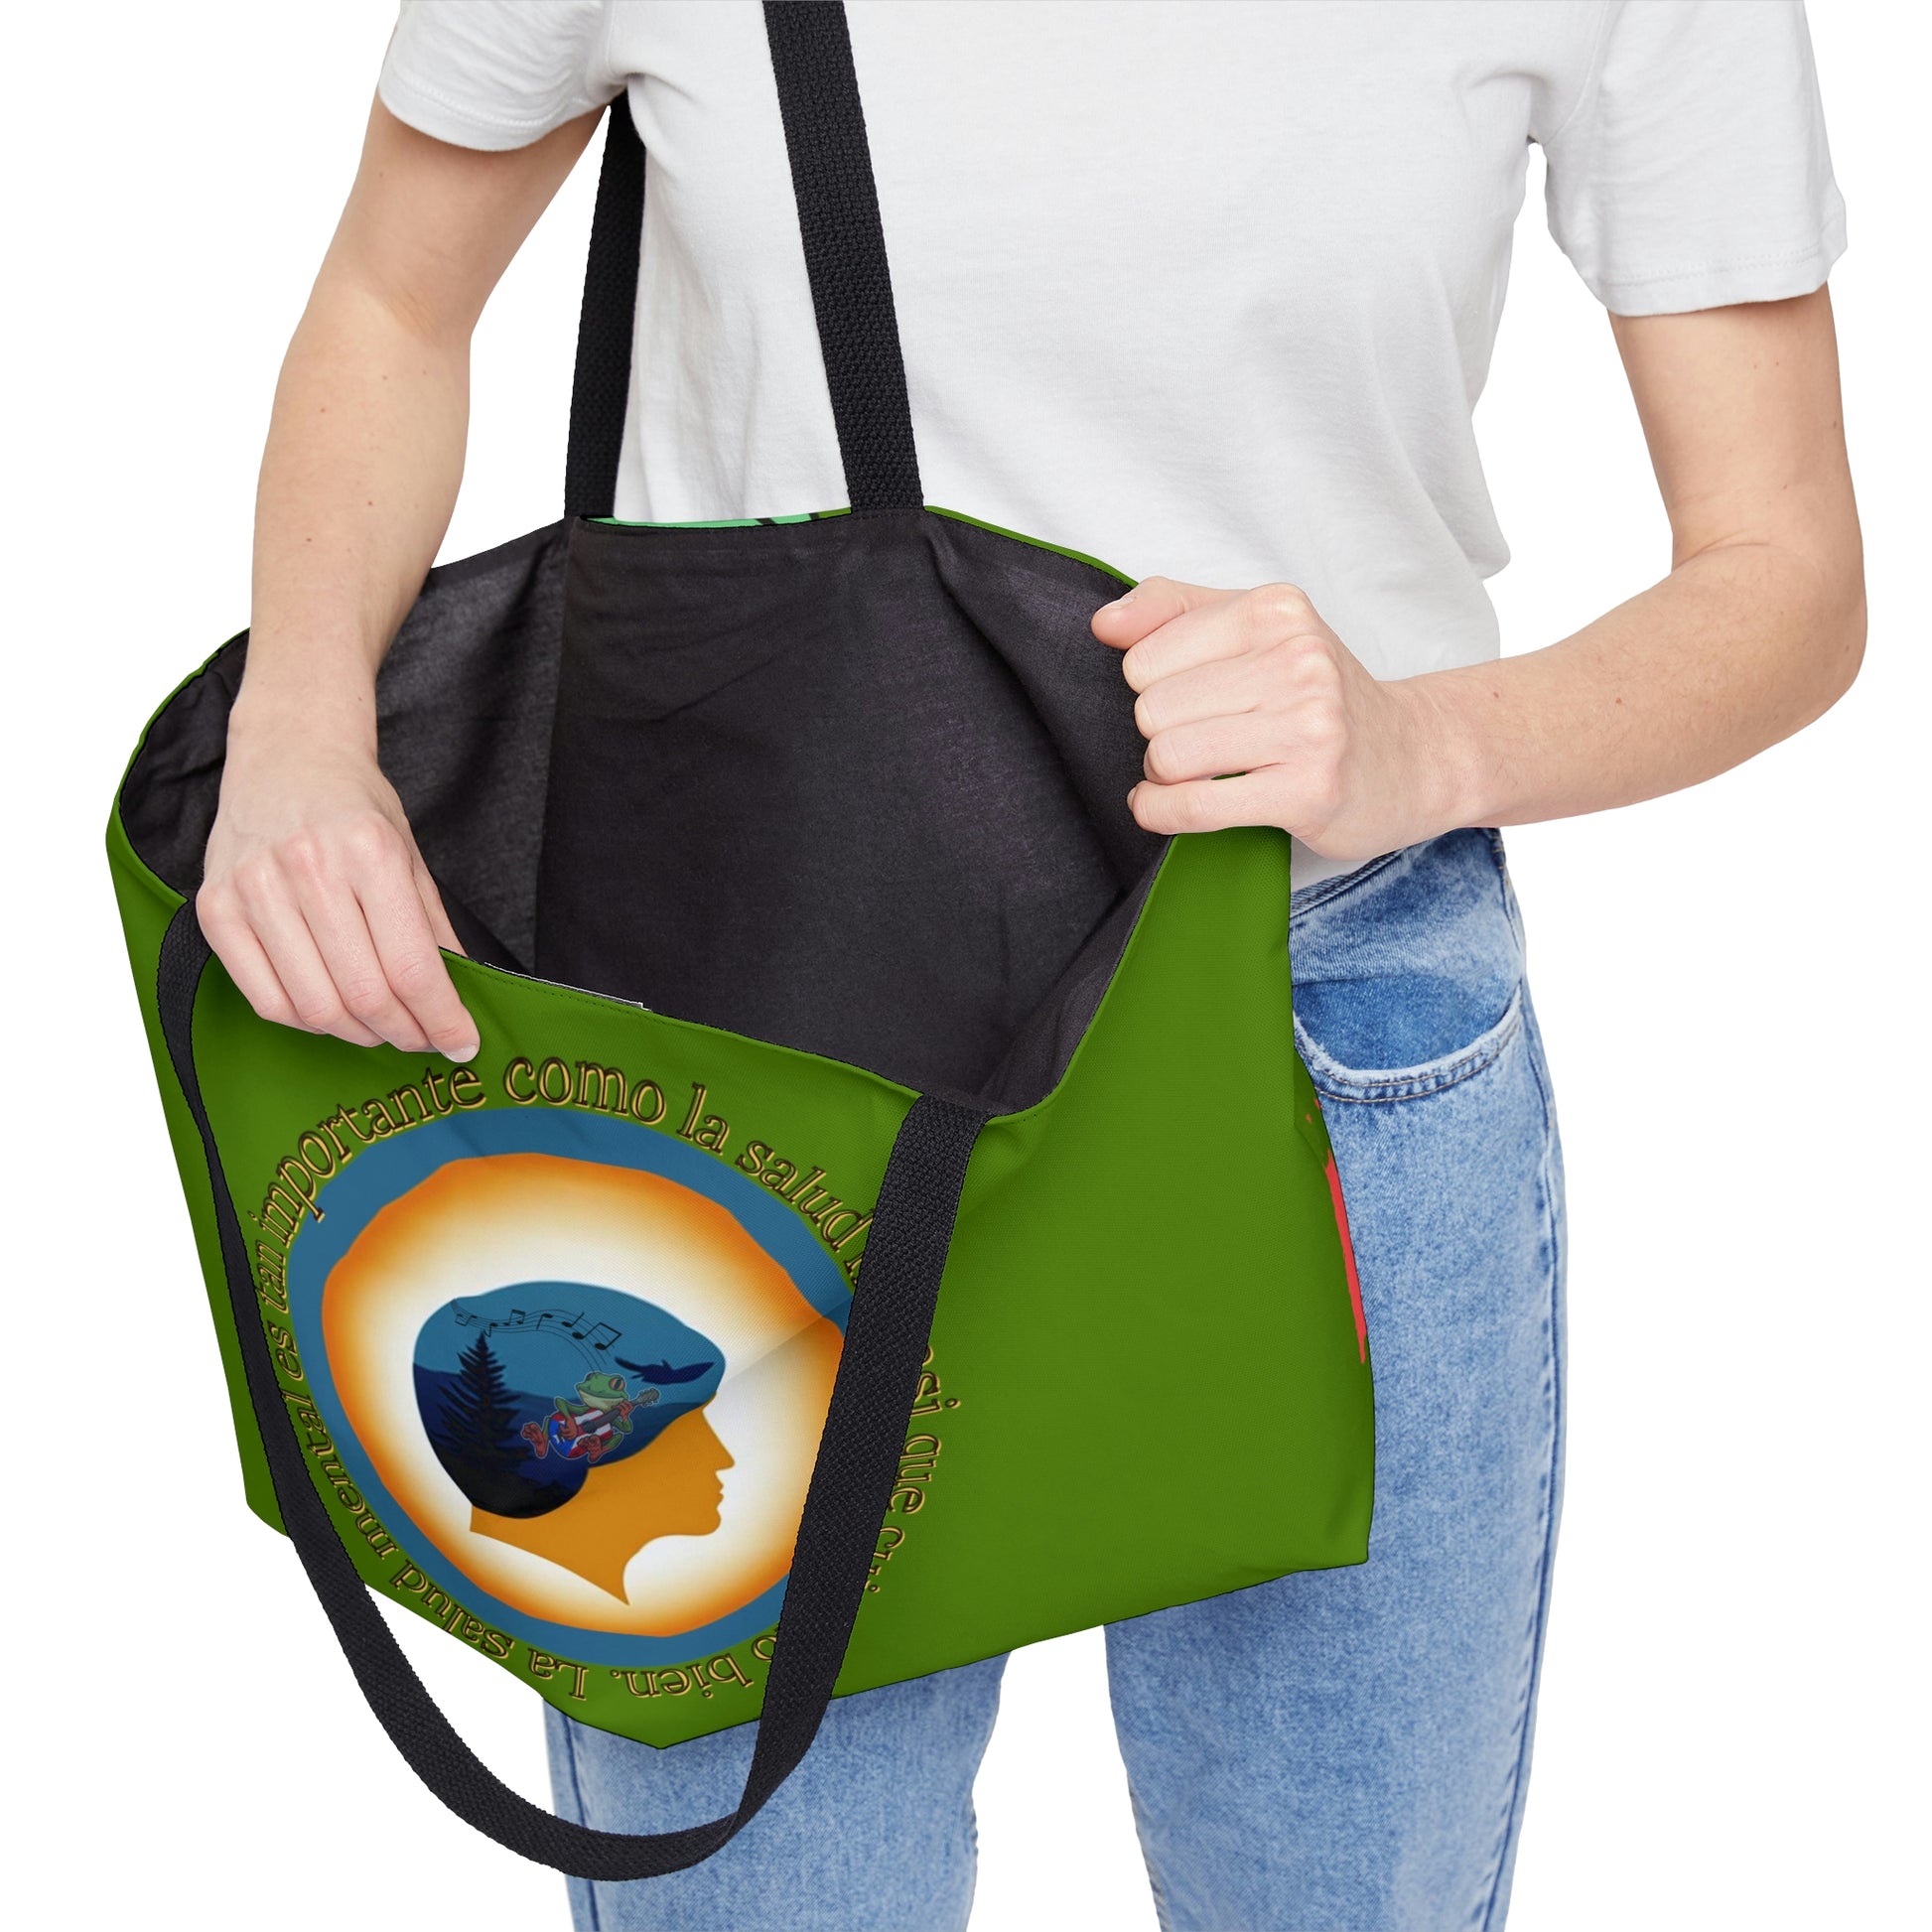 Mental Health Awareness Spanish Weekender Tote Bag | BKLA | Shoes & Accessories | shoes, hats, phone covers, tote bags, clutch bags